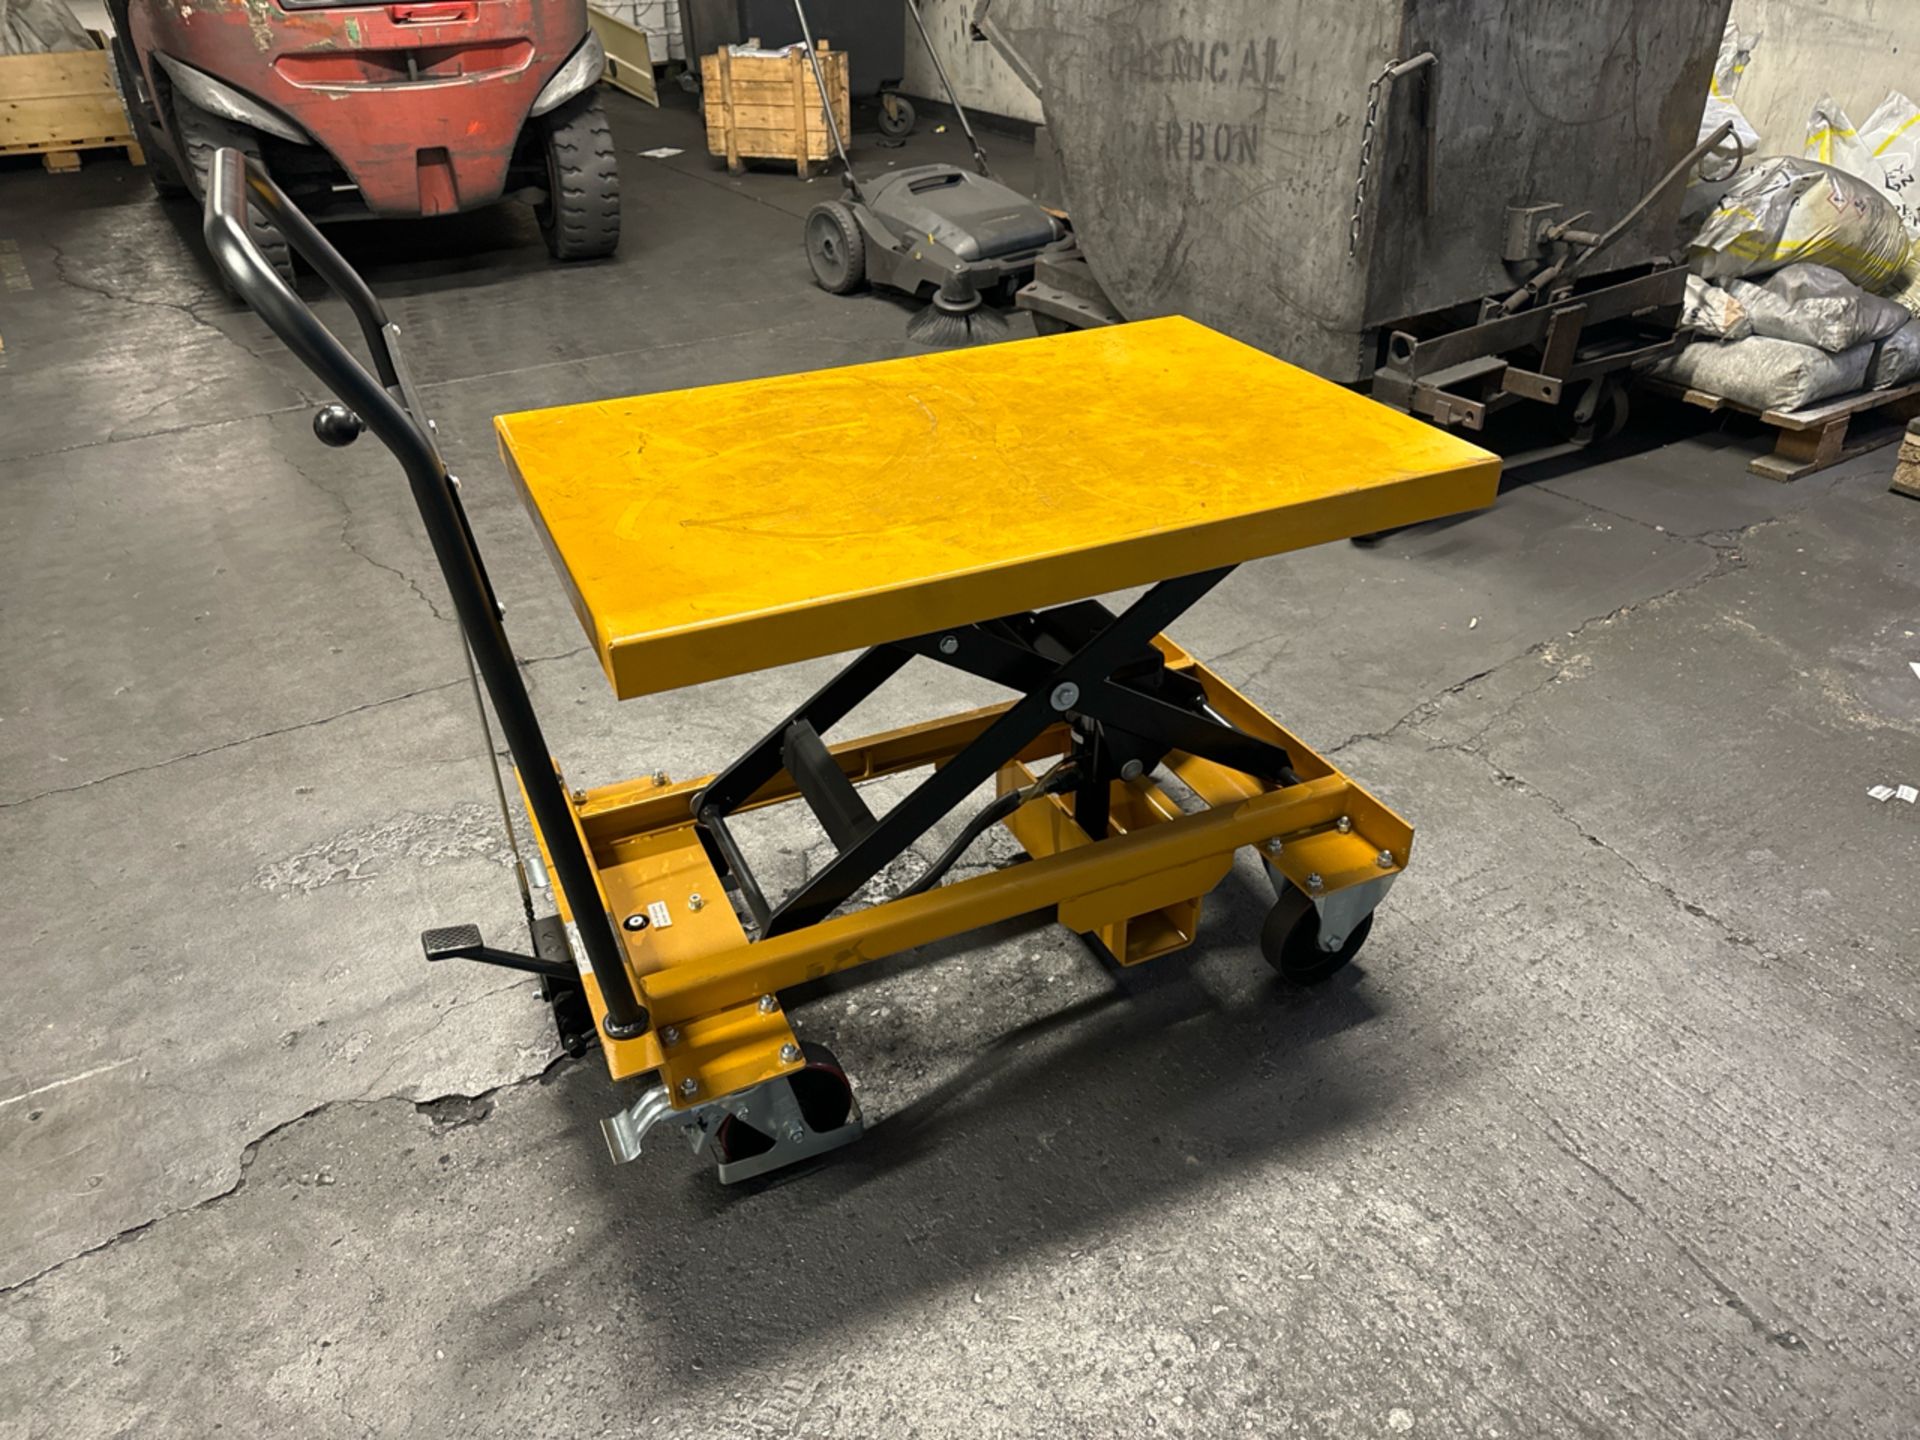 500kg capacity lifting table - Image 5 of 5